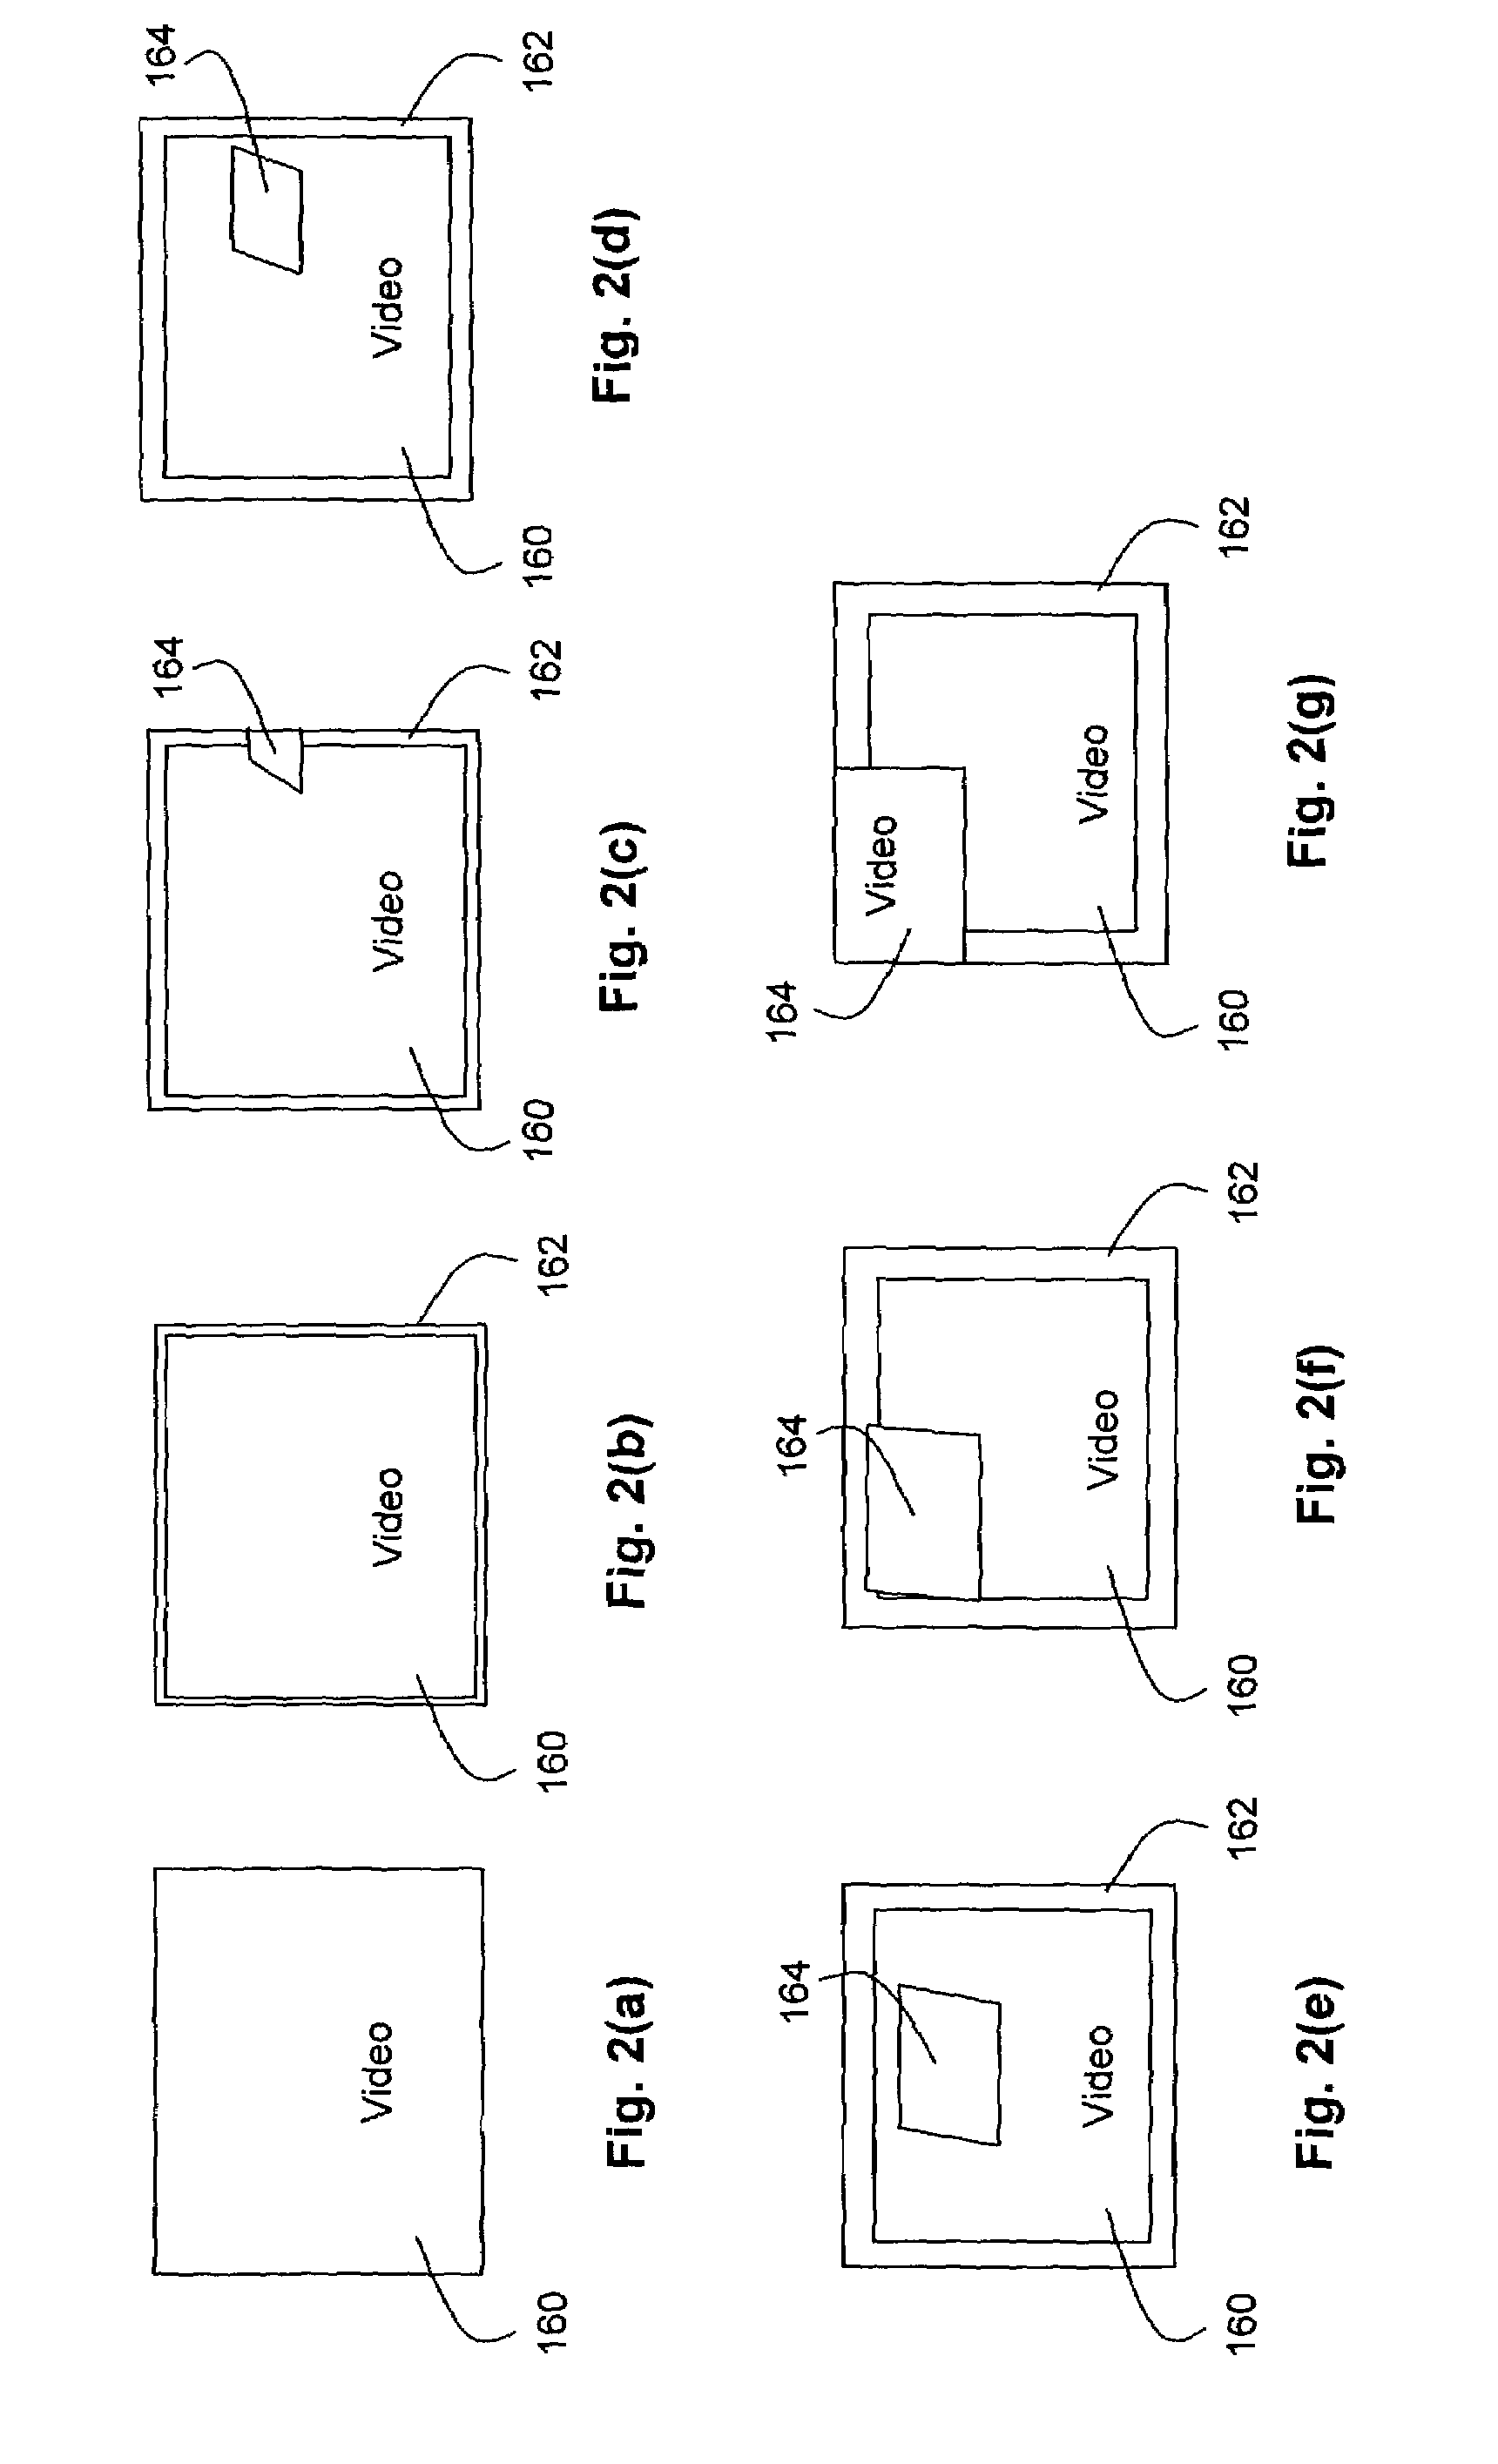 Method and apparatus for controlling the visual presentation of data